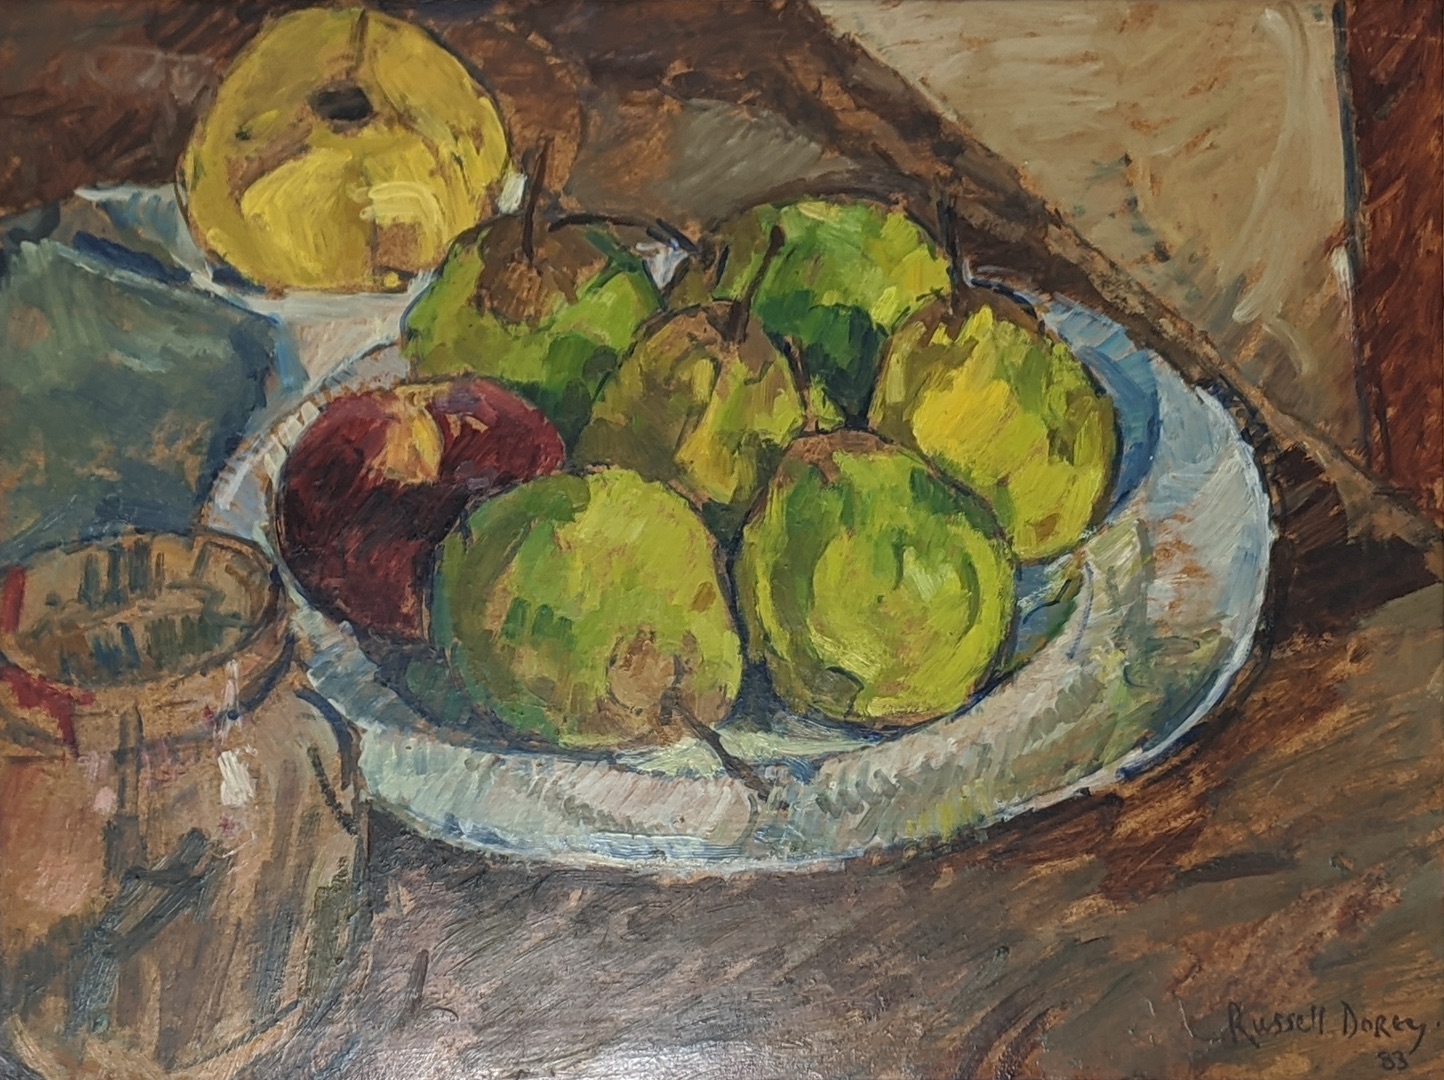 Russell Dorey (20th century British School), Still Life of Pears, 1983, oil on board, signed lower - Image 3 of 4